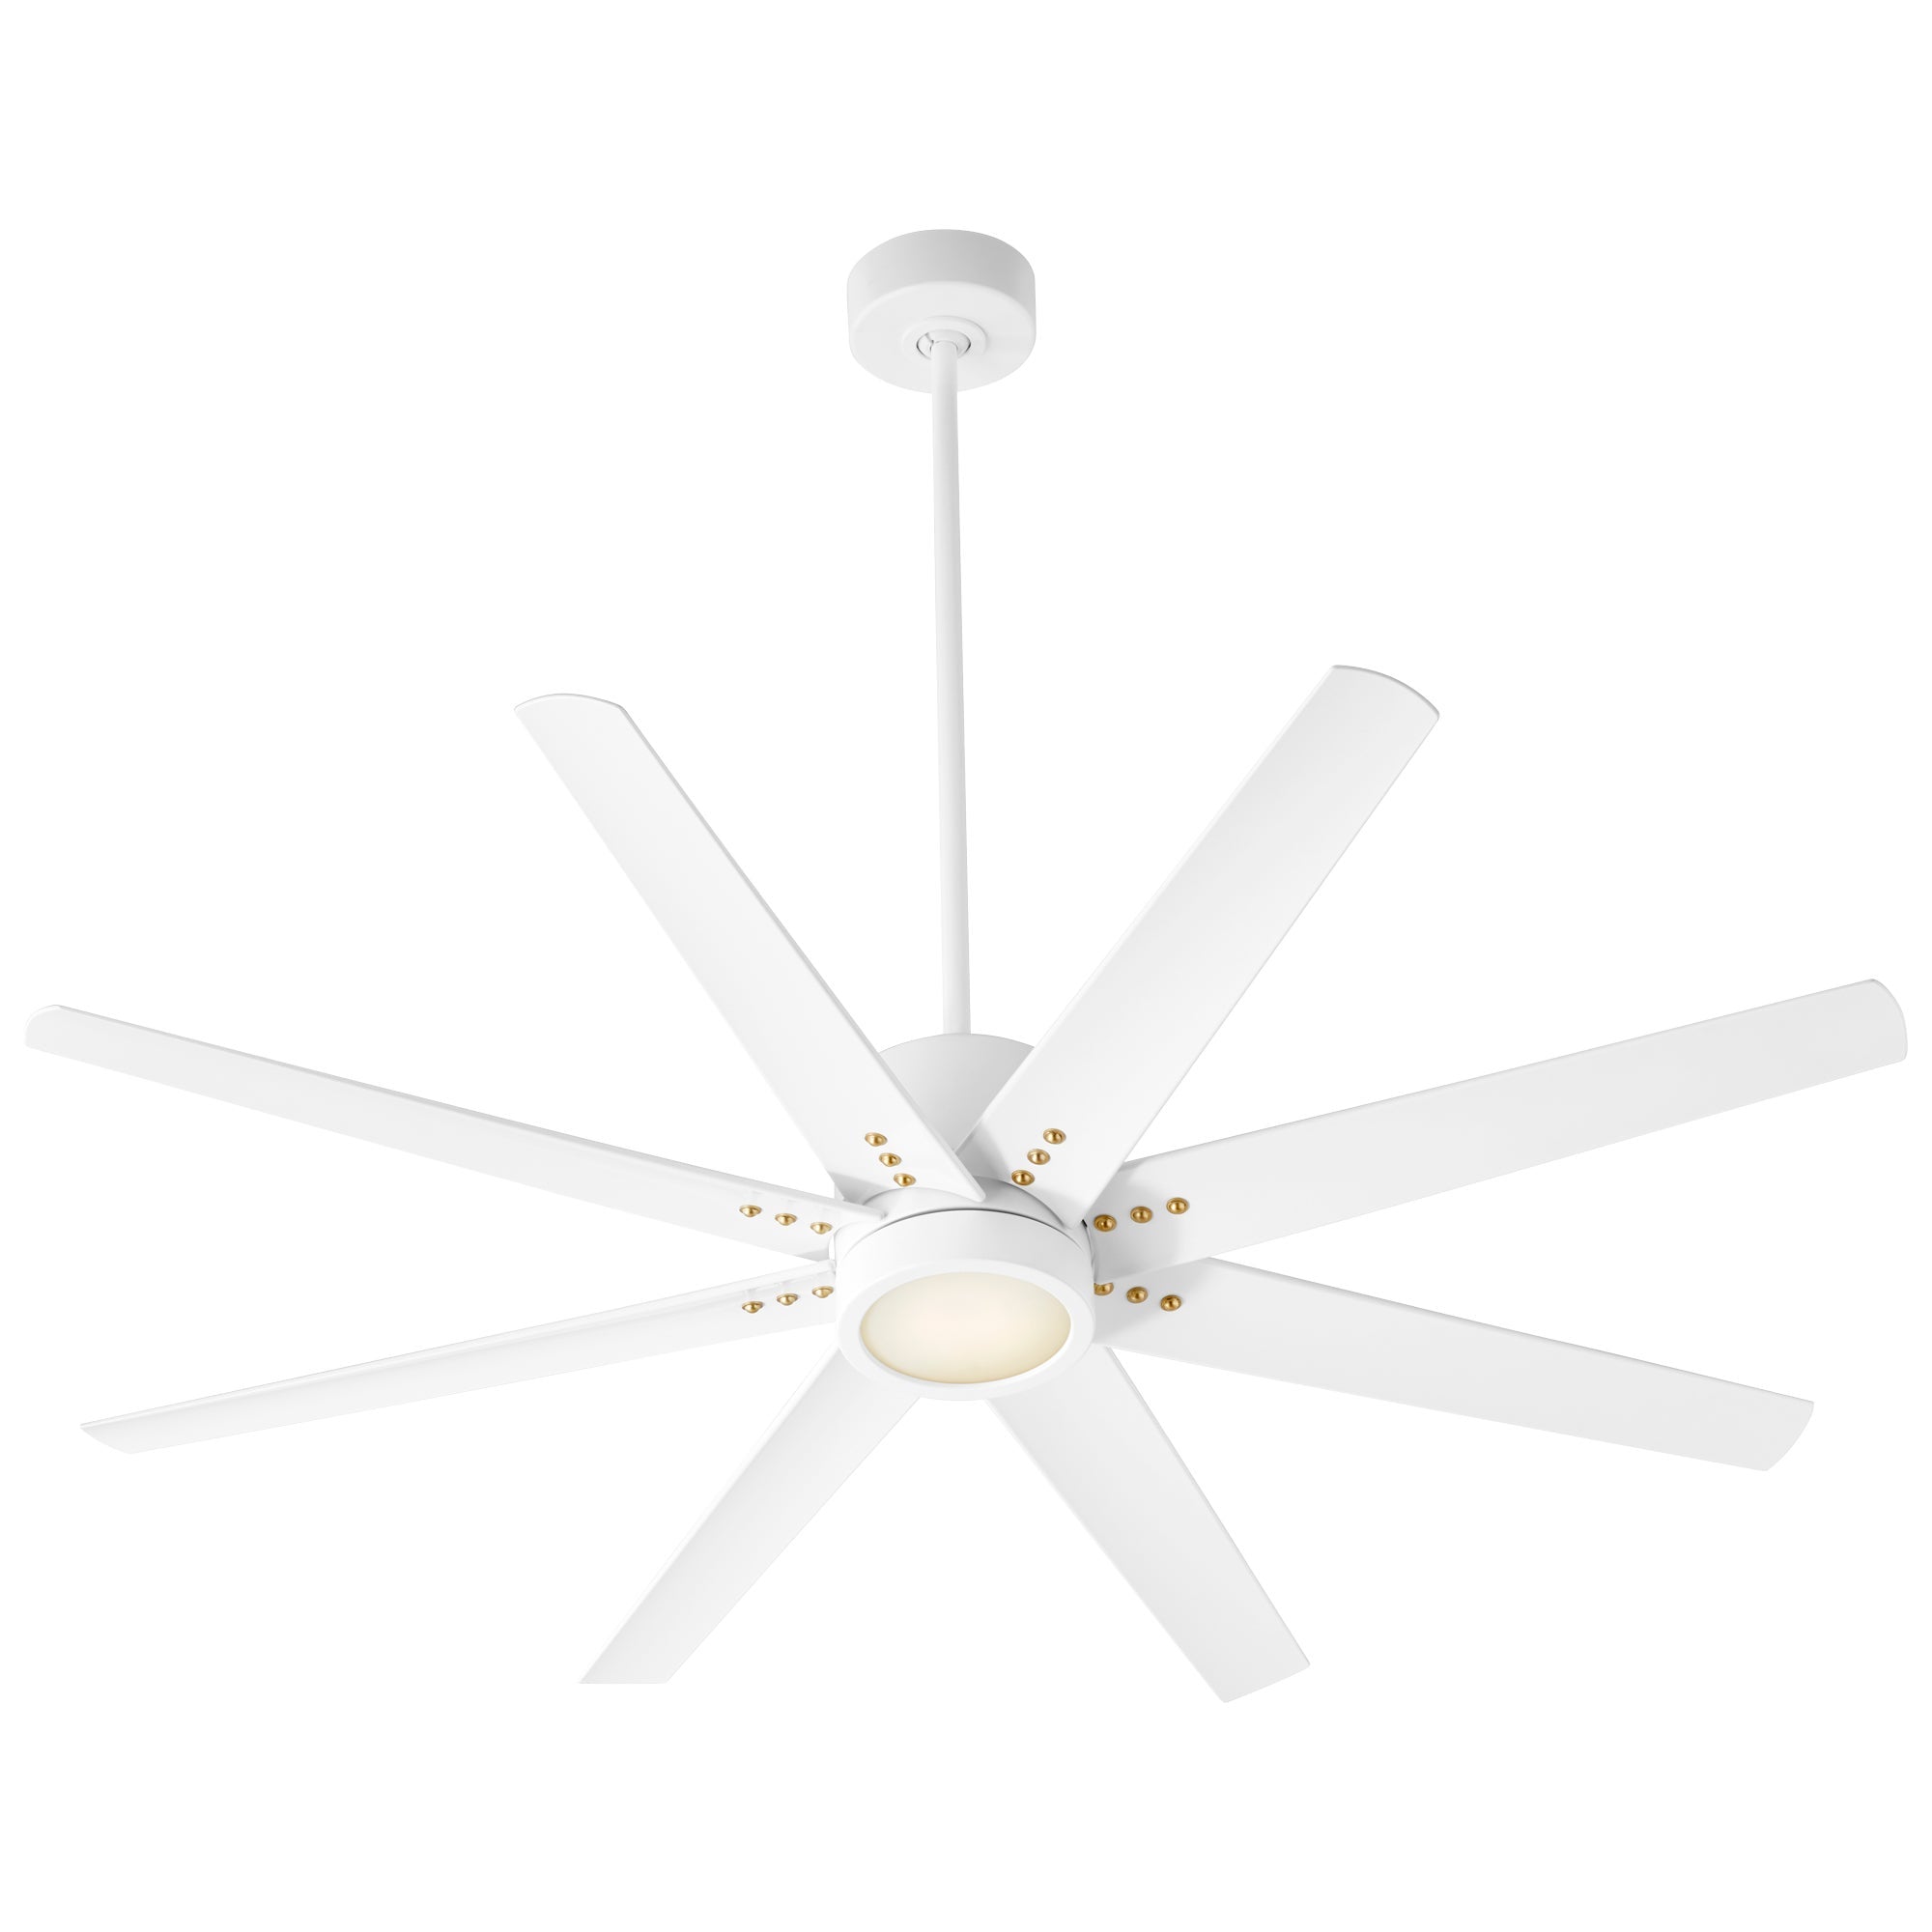 Oxygen FLEET Ceiling Fan 56 Inch Eight Blade Fan 6 Speed Reversible with Remote and Optional LED Light Kit, Damp Rated